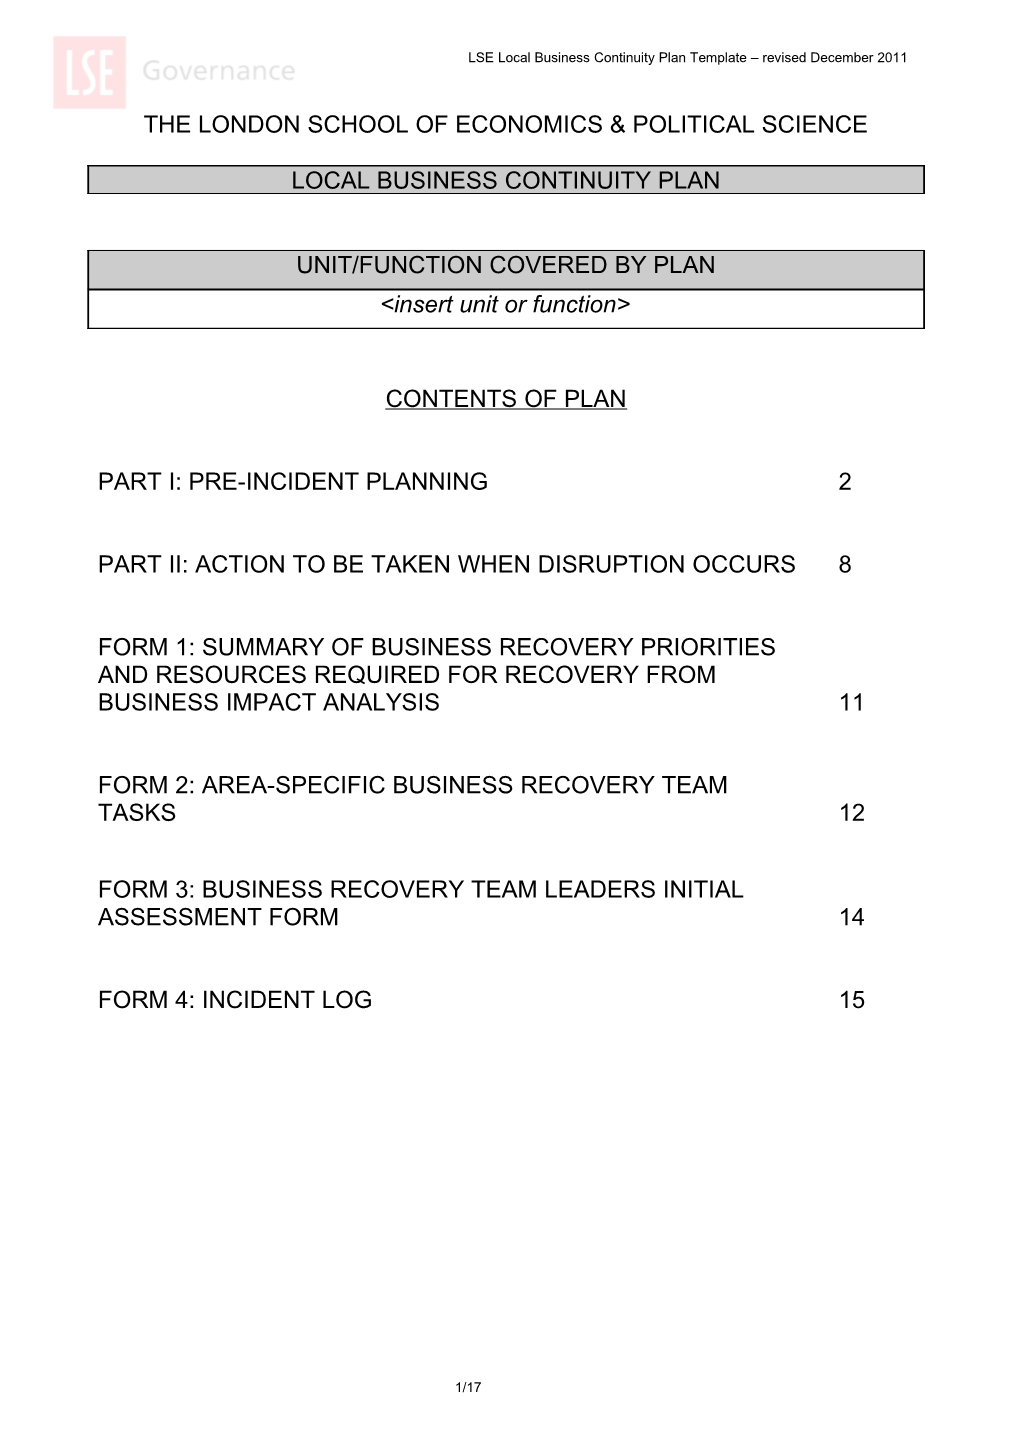 Local Business Continuity Planning Template